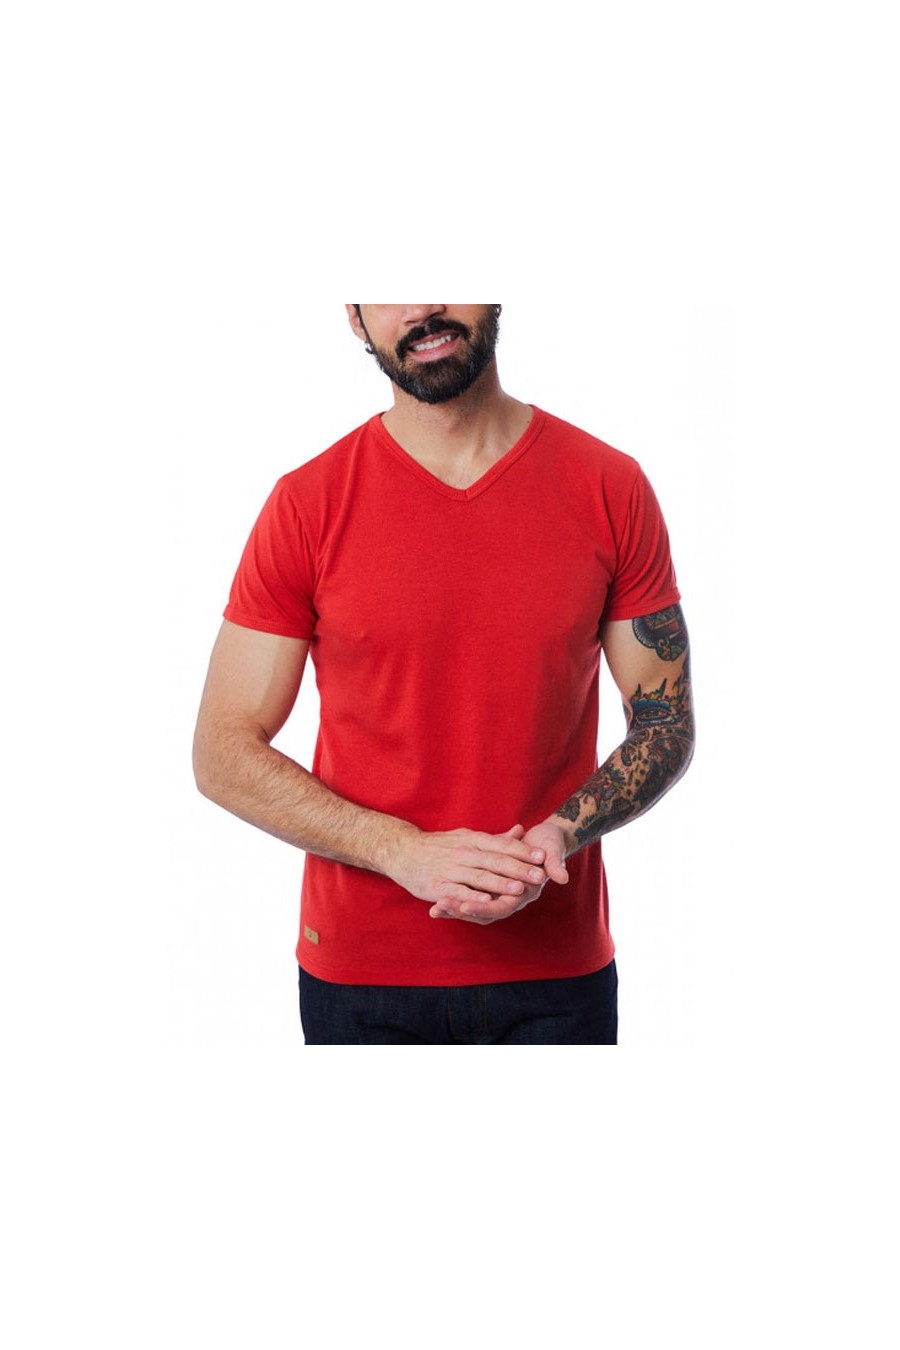 T-SHIRT HOMME MANCHE COURTE COL V ROUGE - Made in France & 100% Recyclé